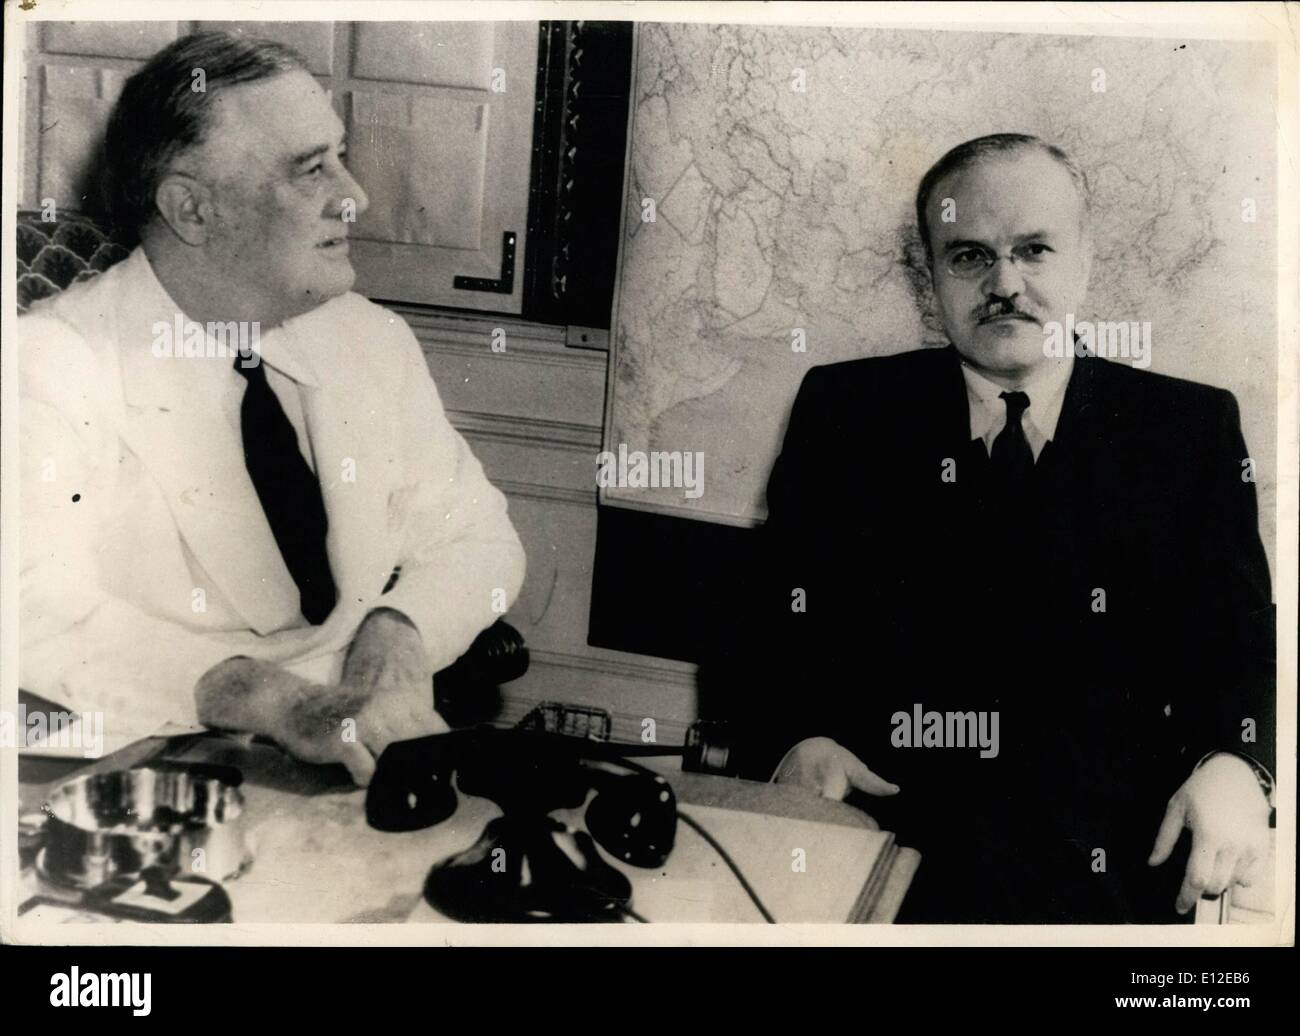 Dec. 16, 2011 - Photo shows President Roosevelt and M.Molotov, photographed during a conference at the White House. Stock Photo